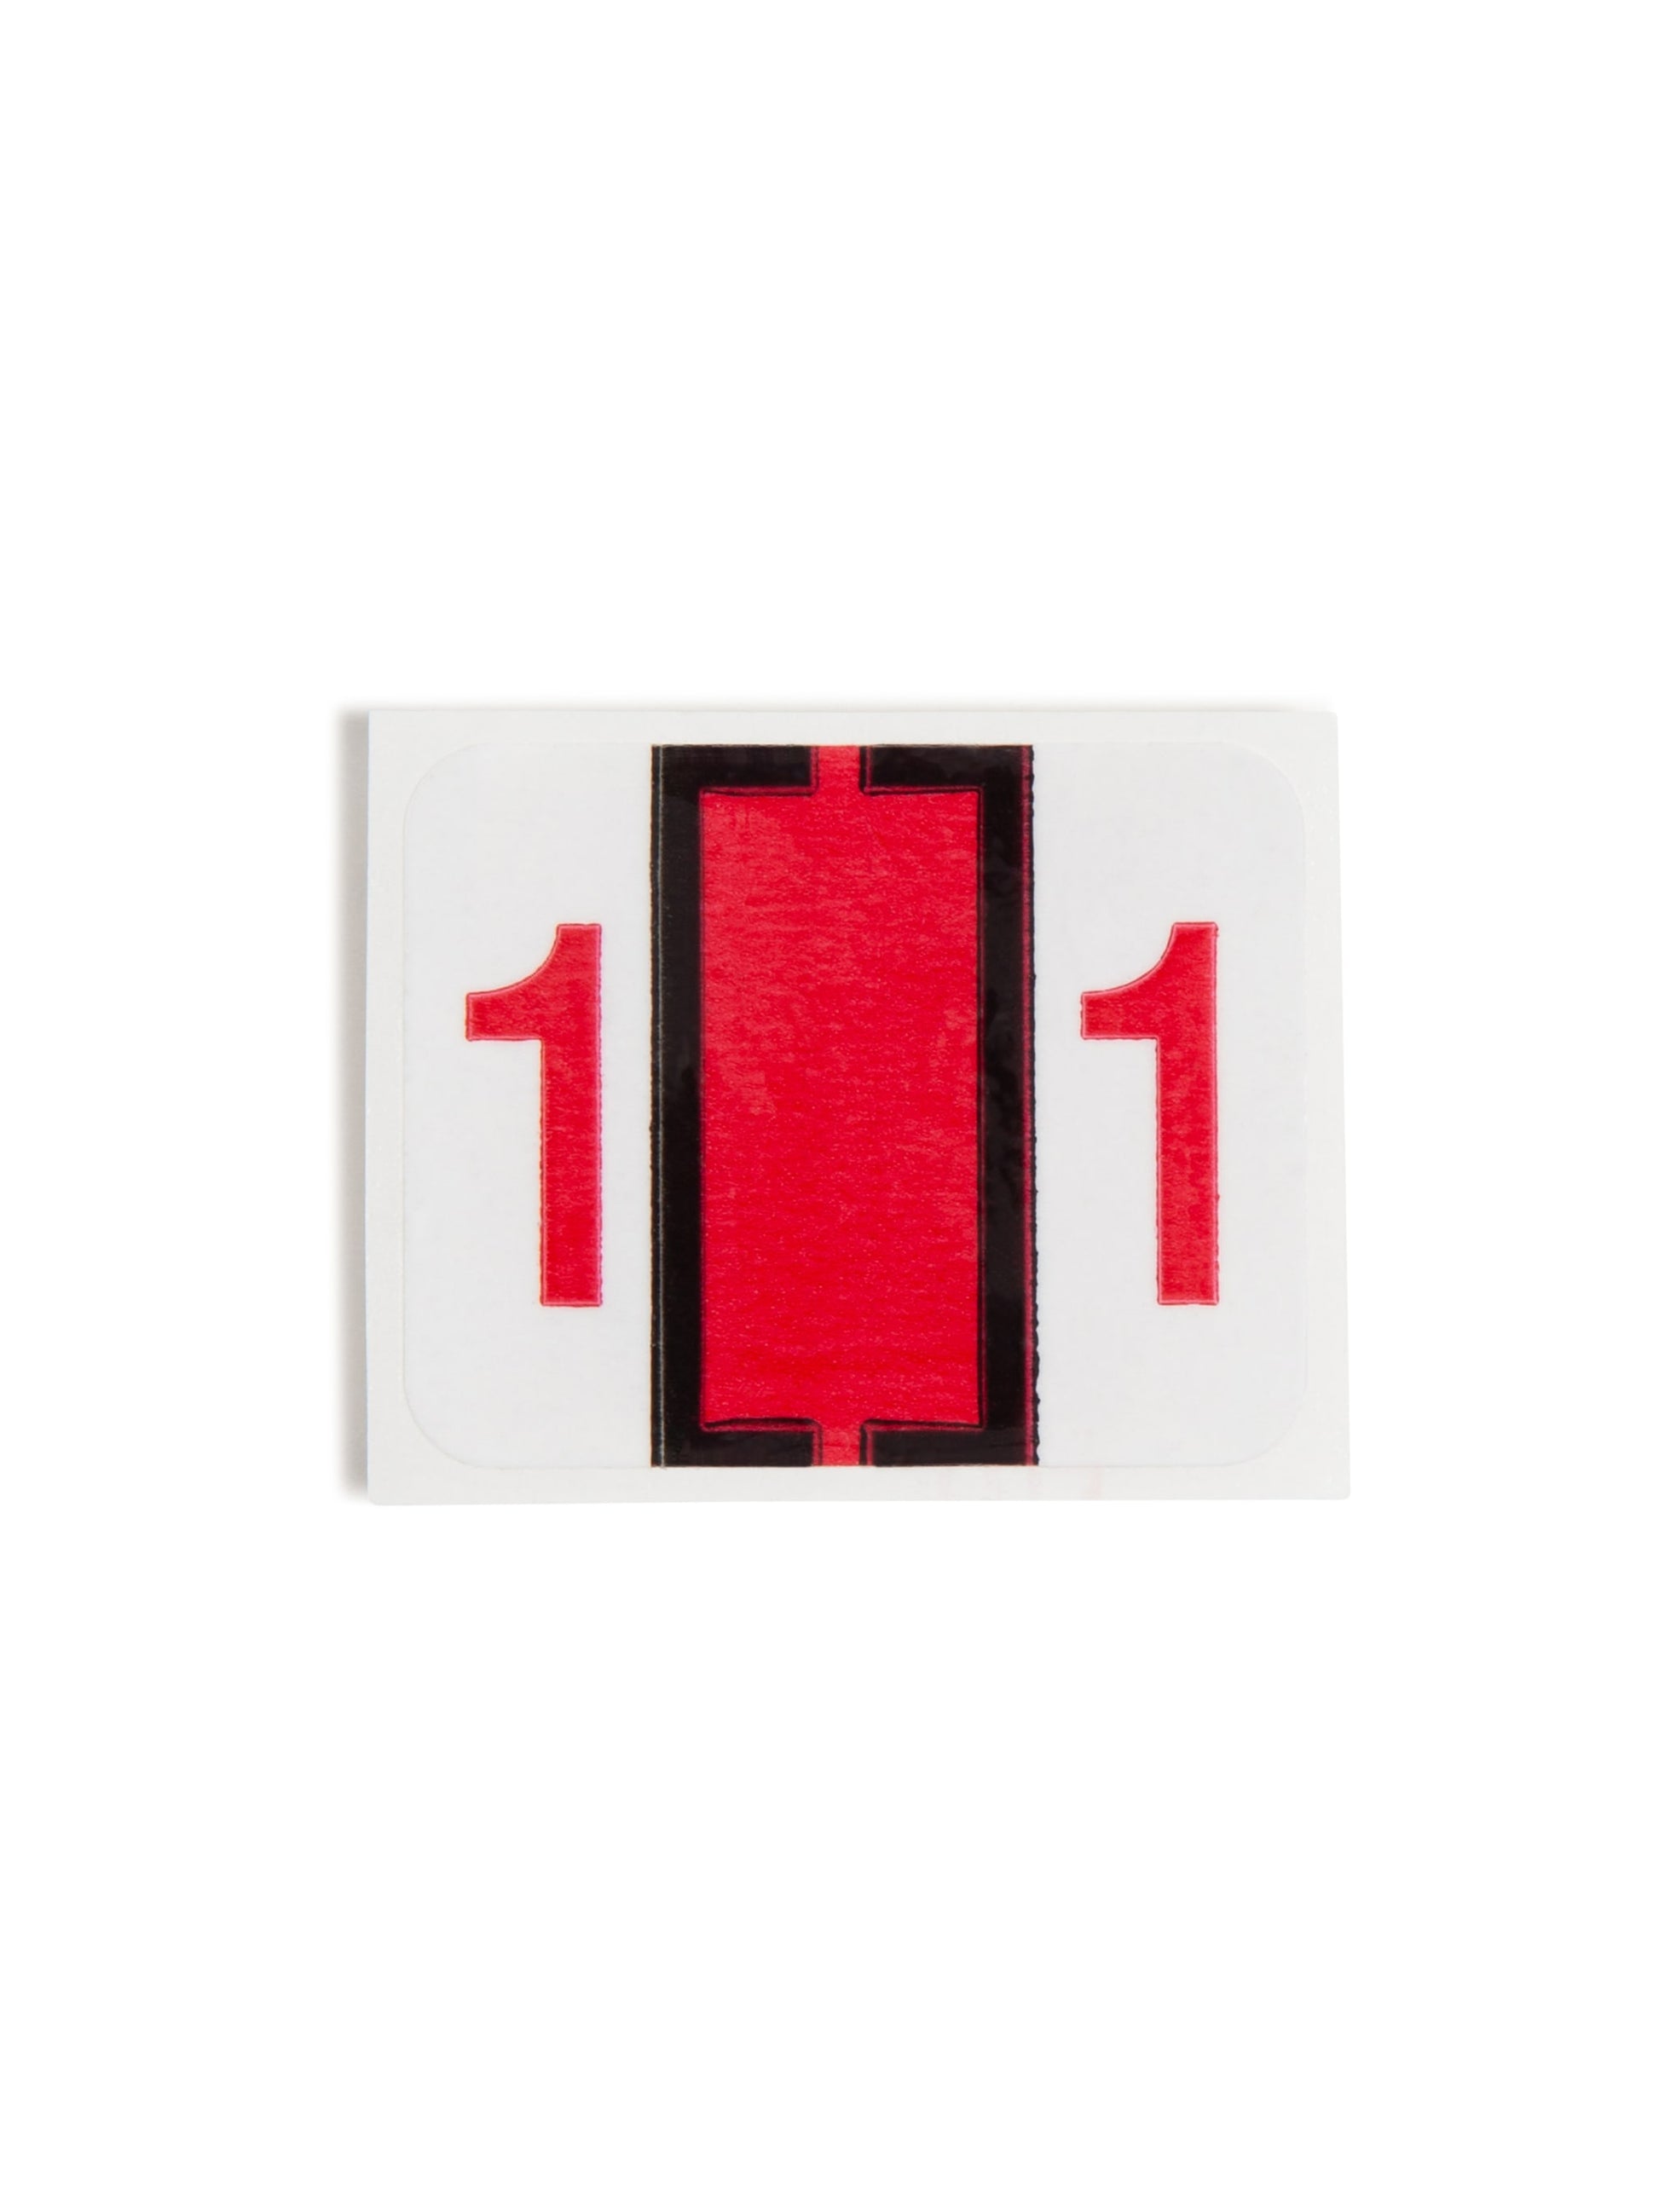 BCCRN Bar Style Color-Coded Numeric Labels, 0-9 Rolls, Red Color, 1-1/4" X 1" Size, Set of 1, 086486673716